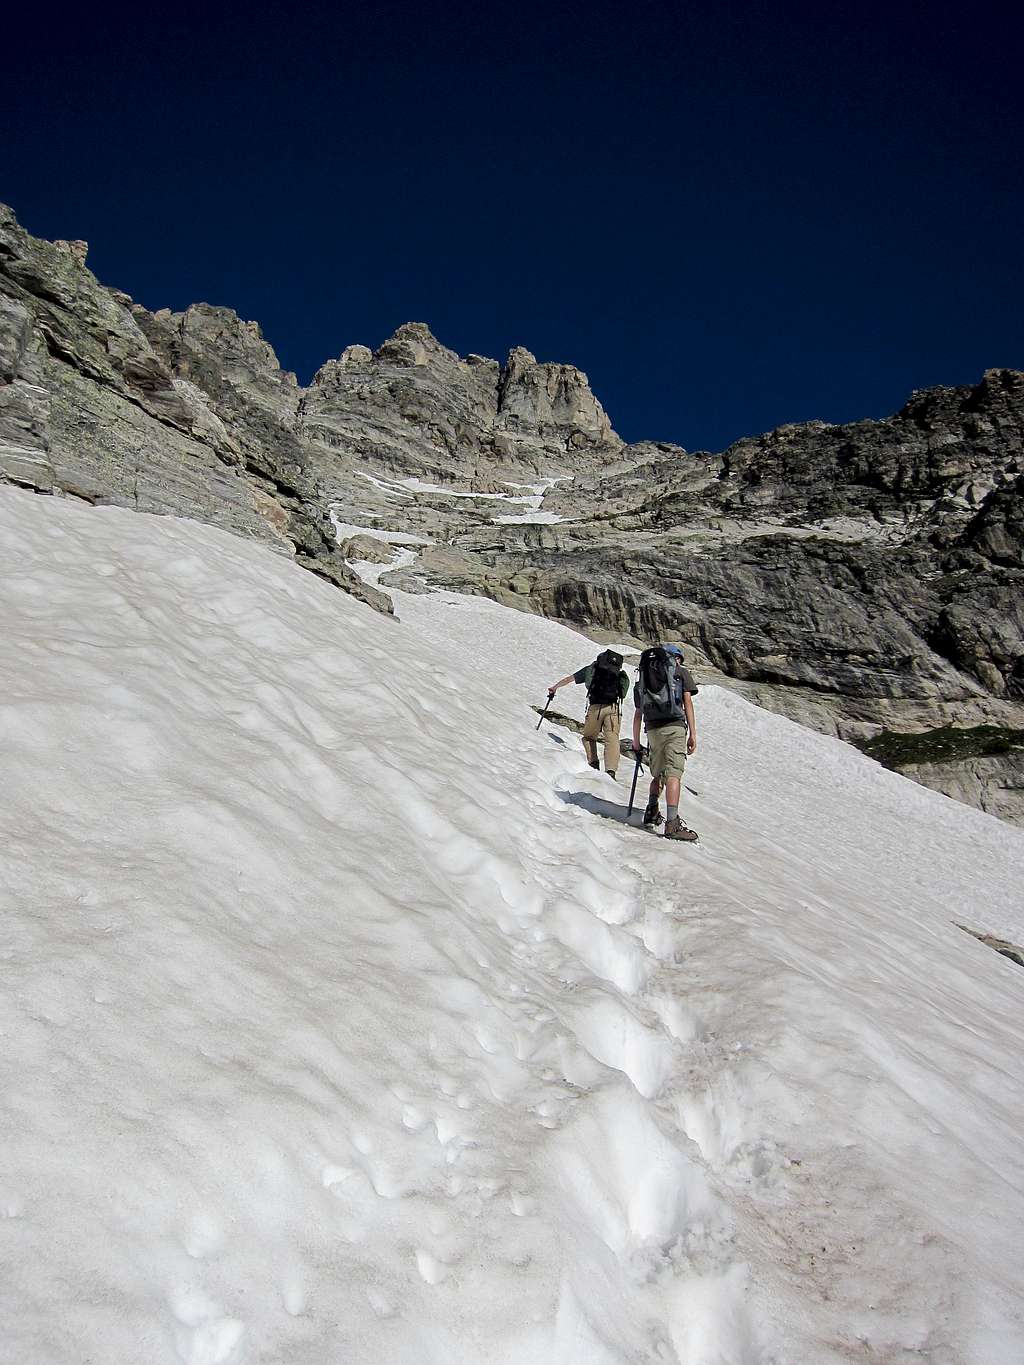 Myself and my little brother heading up a snowfield on the east face of Teewinot